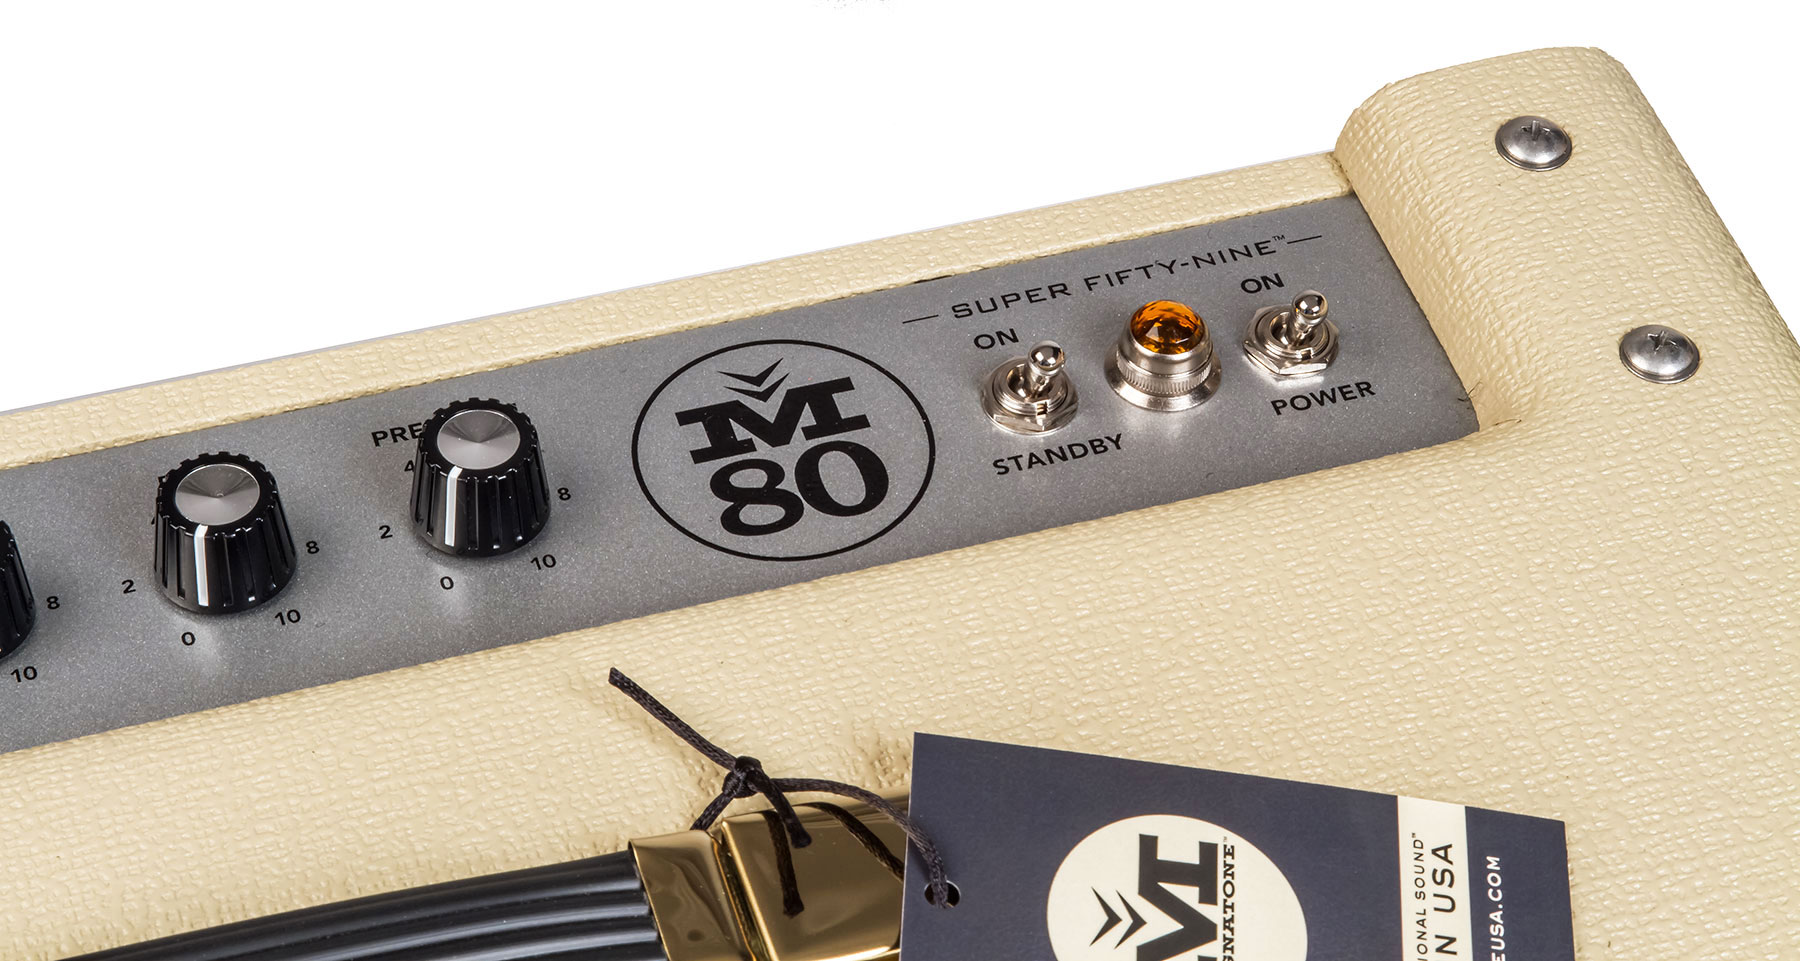 Magnatone Master Collection Super Fifty-nine M-80 Combo 45w 1x12 Gold - Electric guitar combo amp - Variation 3